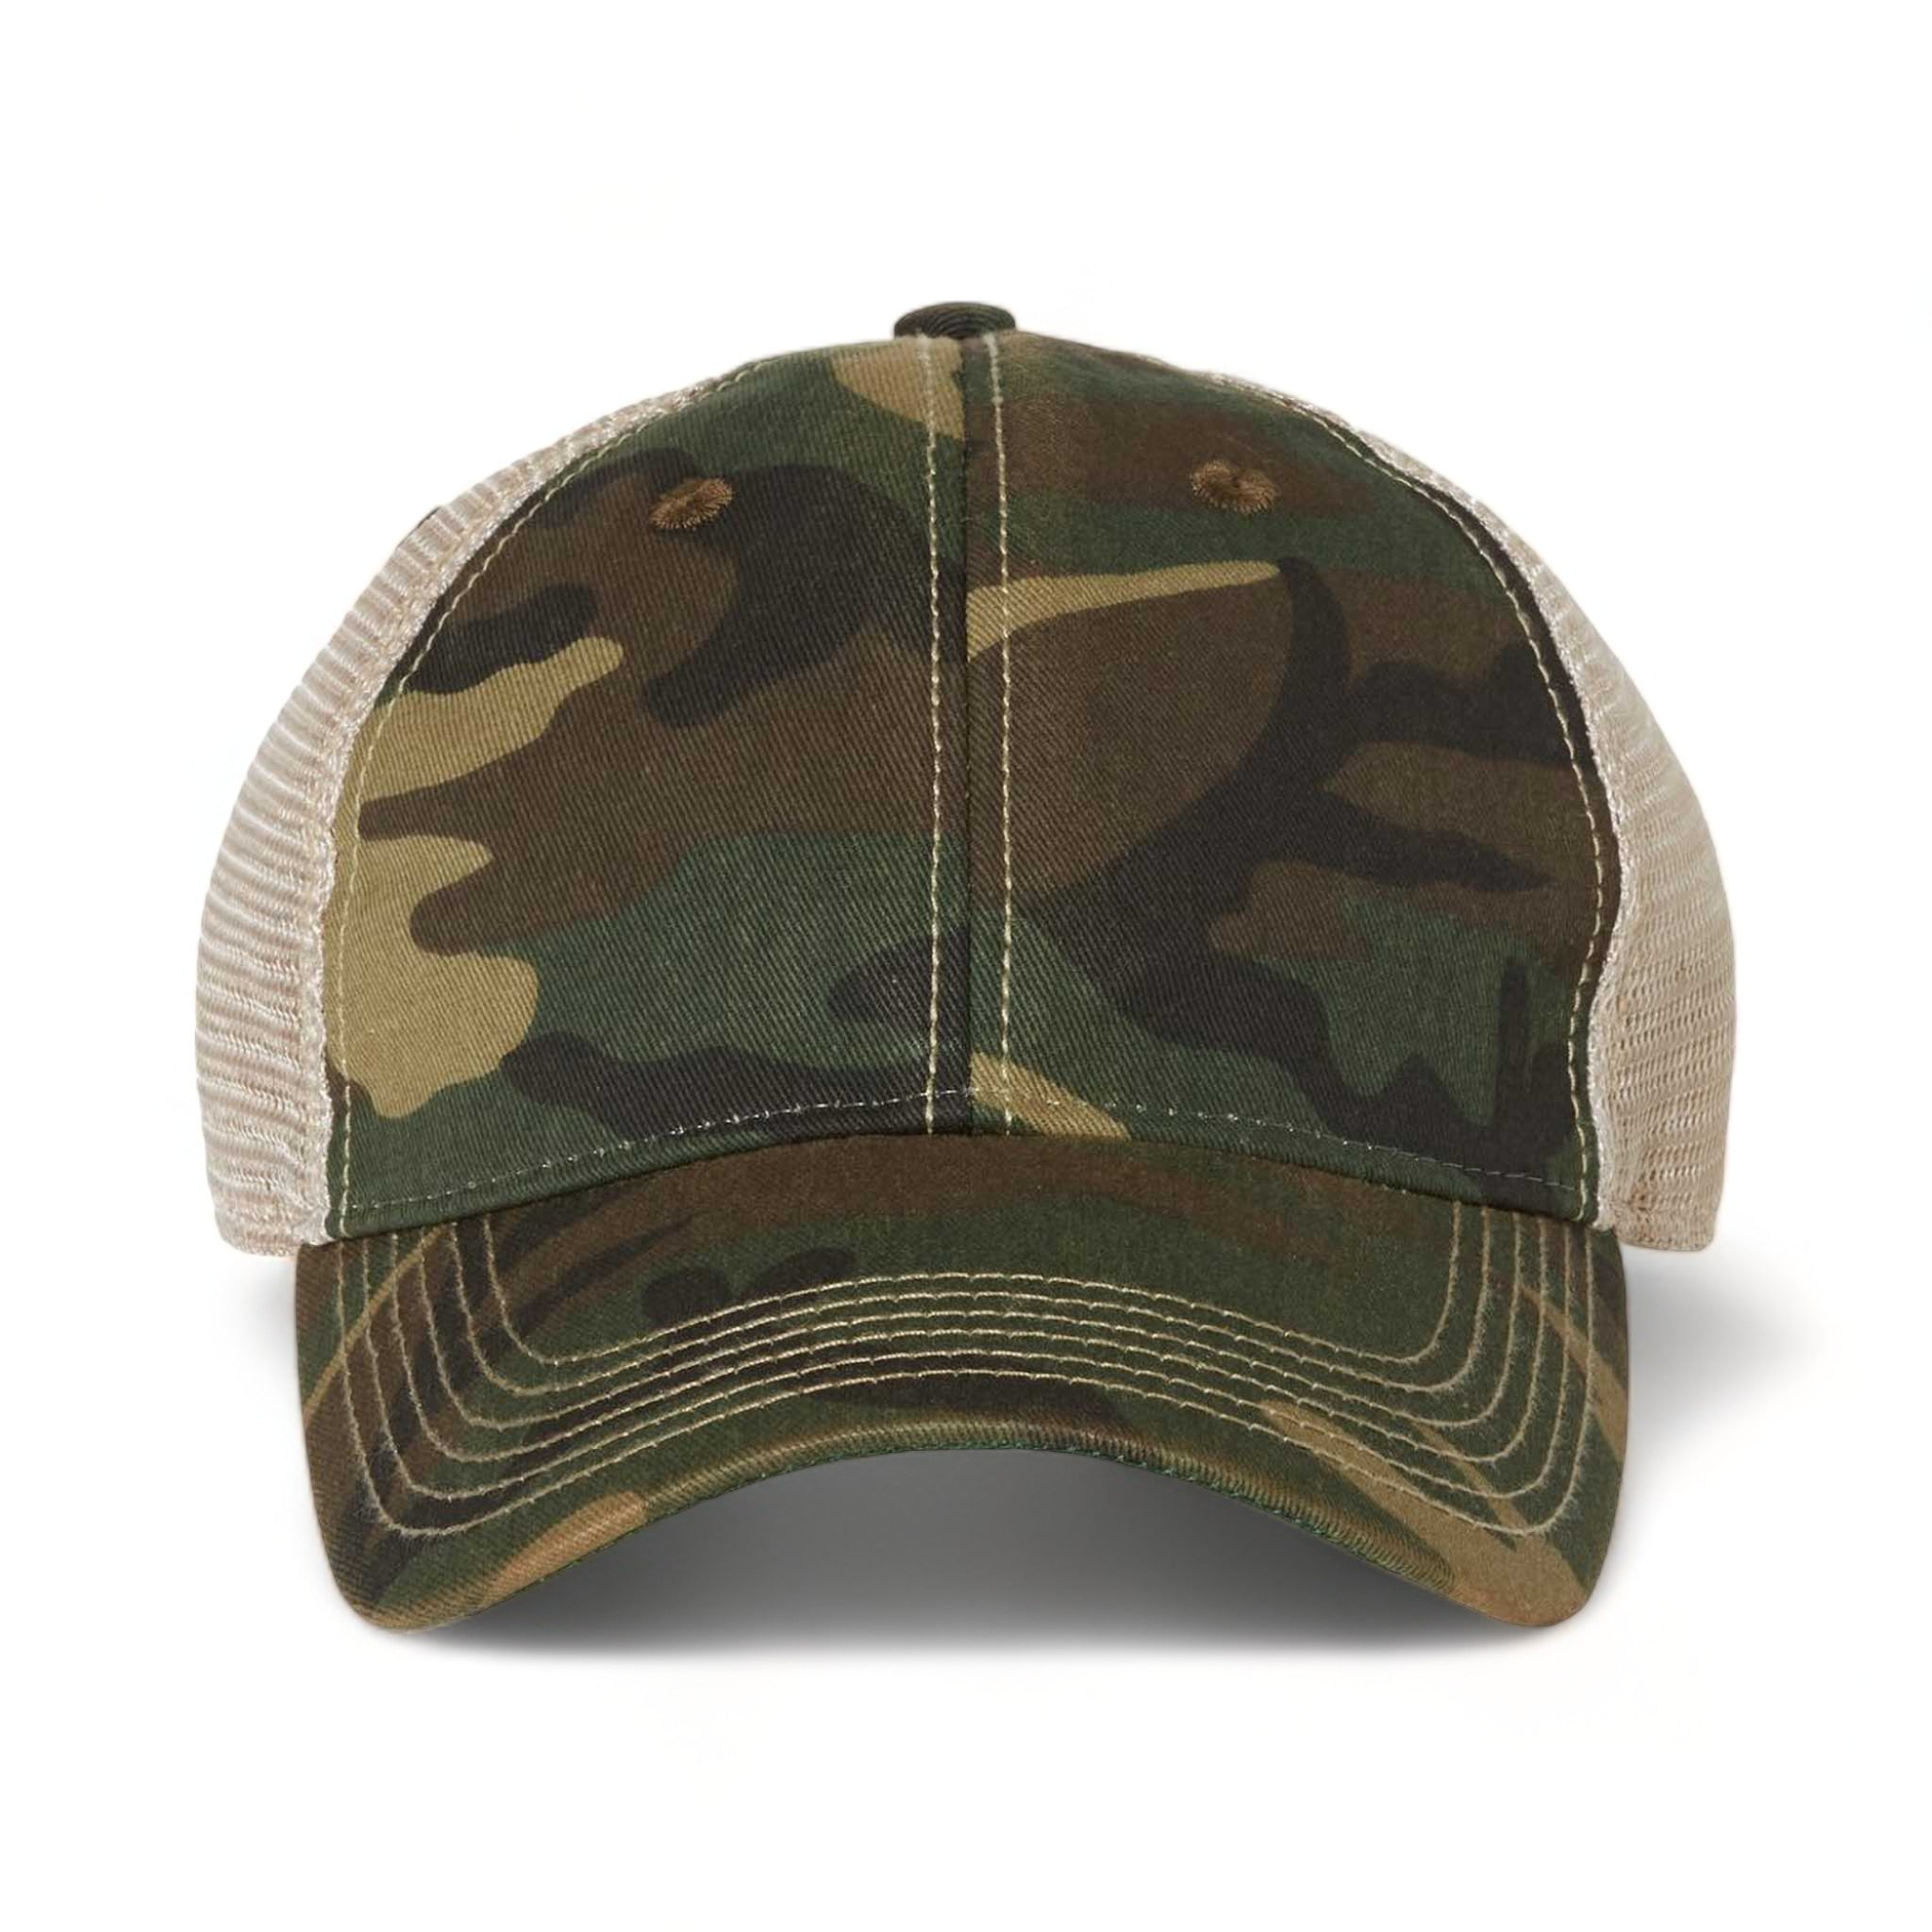 Front view of LEGACY OFA custom hat in army camo and khaki